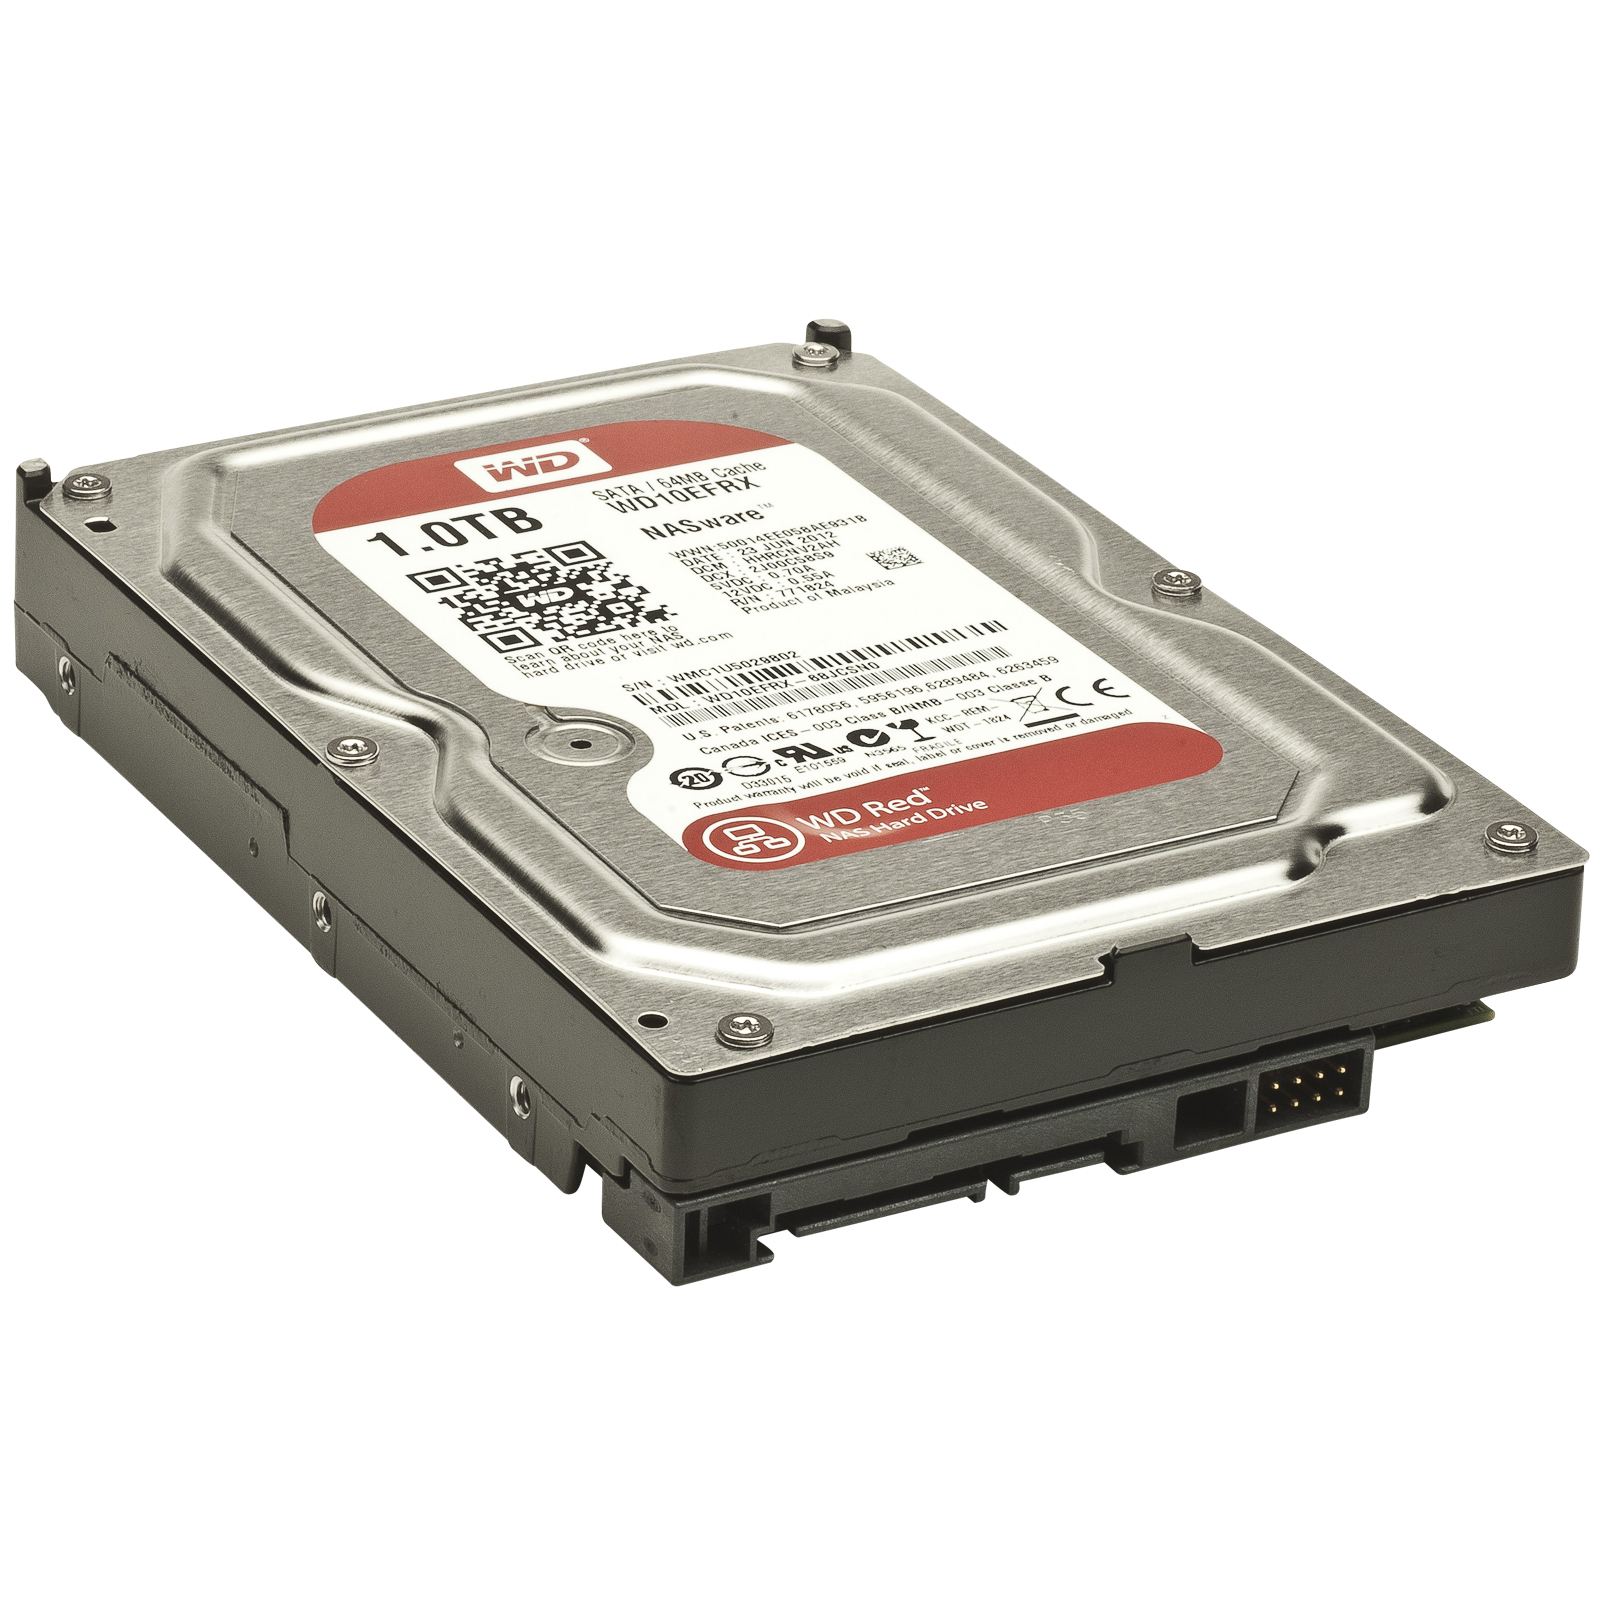 1Tb WD Red WD10EFRX, IntelliPower, 3.5", SATA III, 64Mb